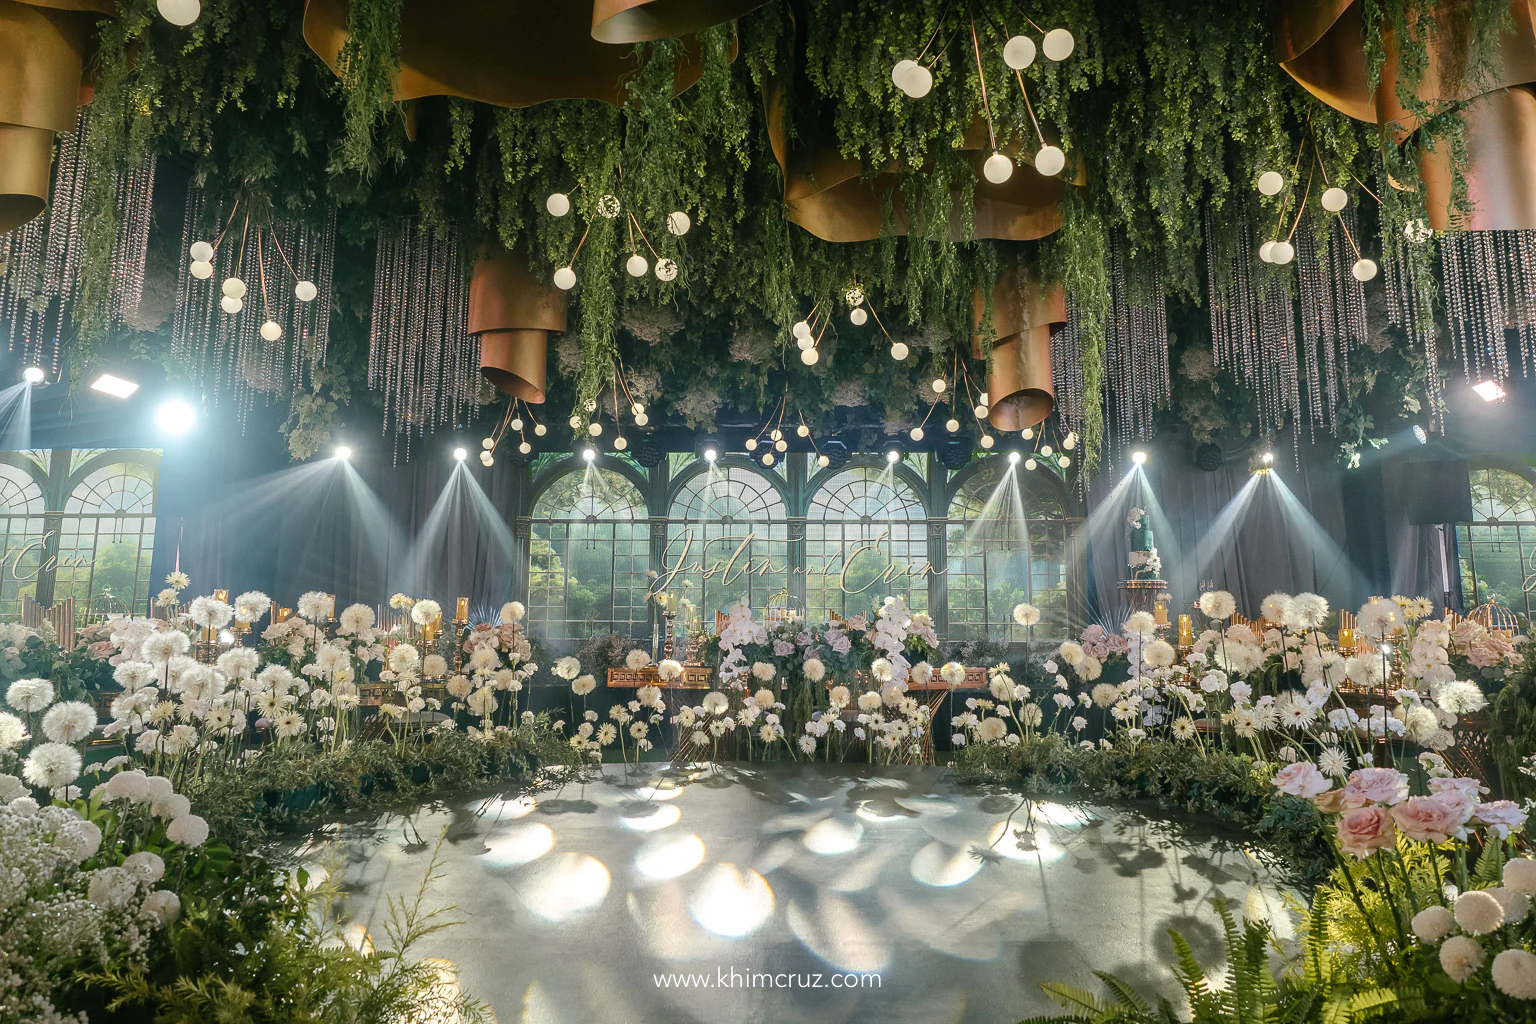 floral design enclosing the dance floor of a dreamy conservatory-inspired wedding reception